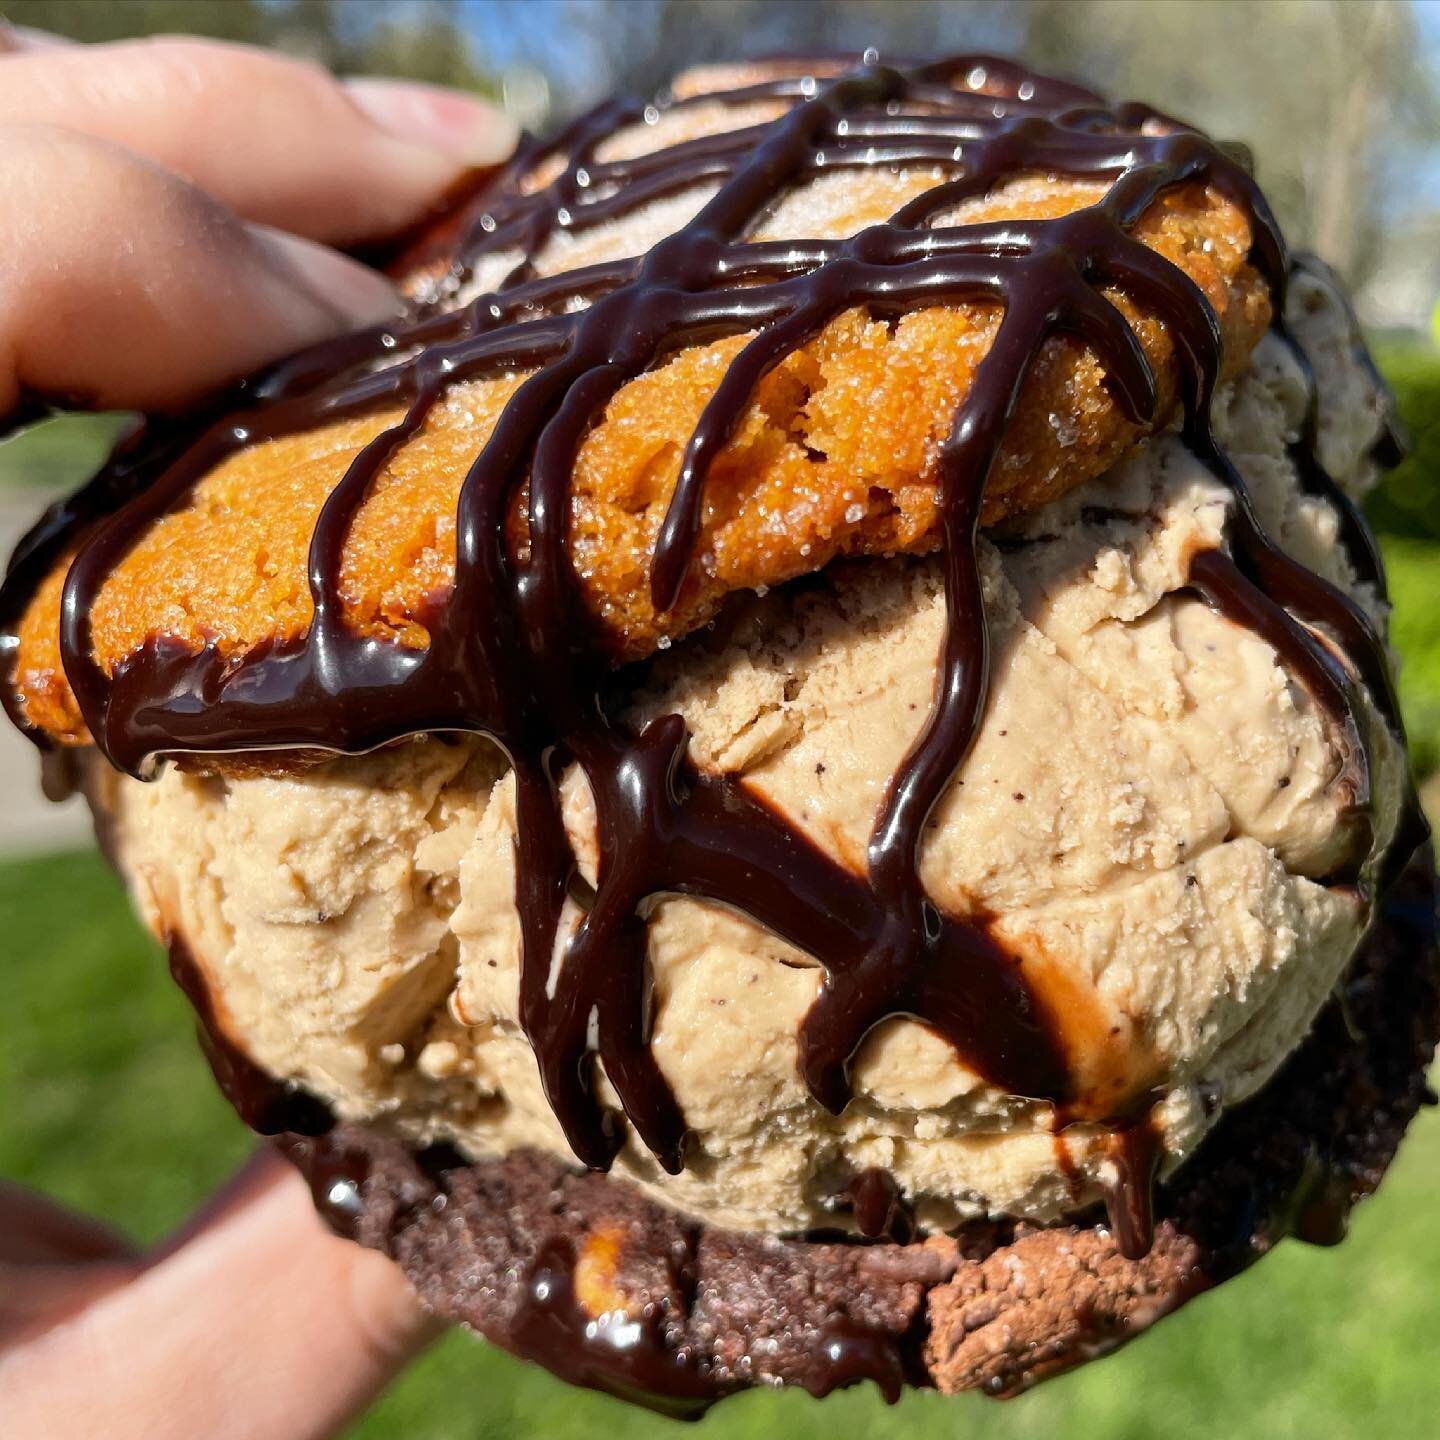 Attention coffee lovers: you can now get your caffeinated coffee fix as an ice cream cookie sandwich! 📷 Peanut butter cookie on top, chocolate chocolate chip cookie on the bottom with espresso crunch Ice cream and a dark chocolate drizzle ☕️ 🍦🍪 #n